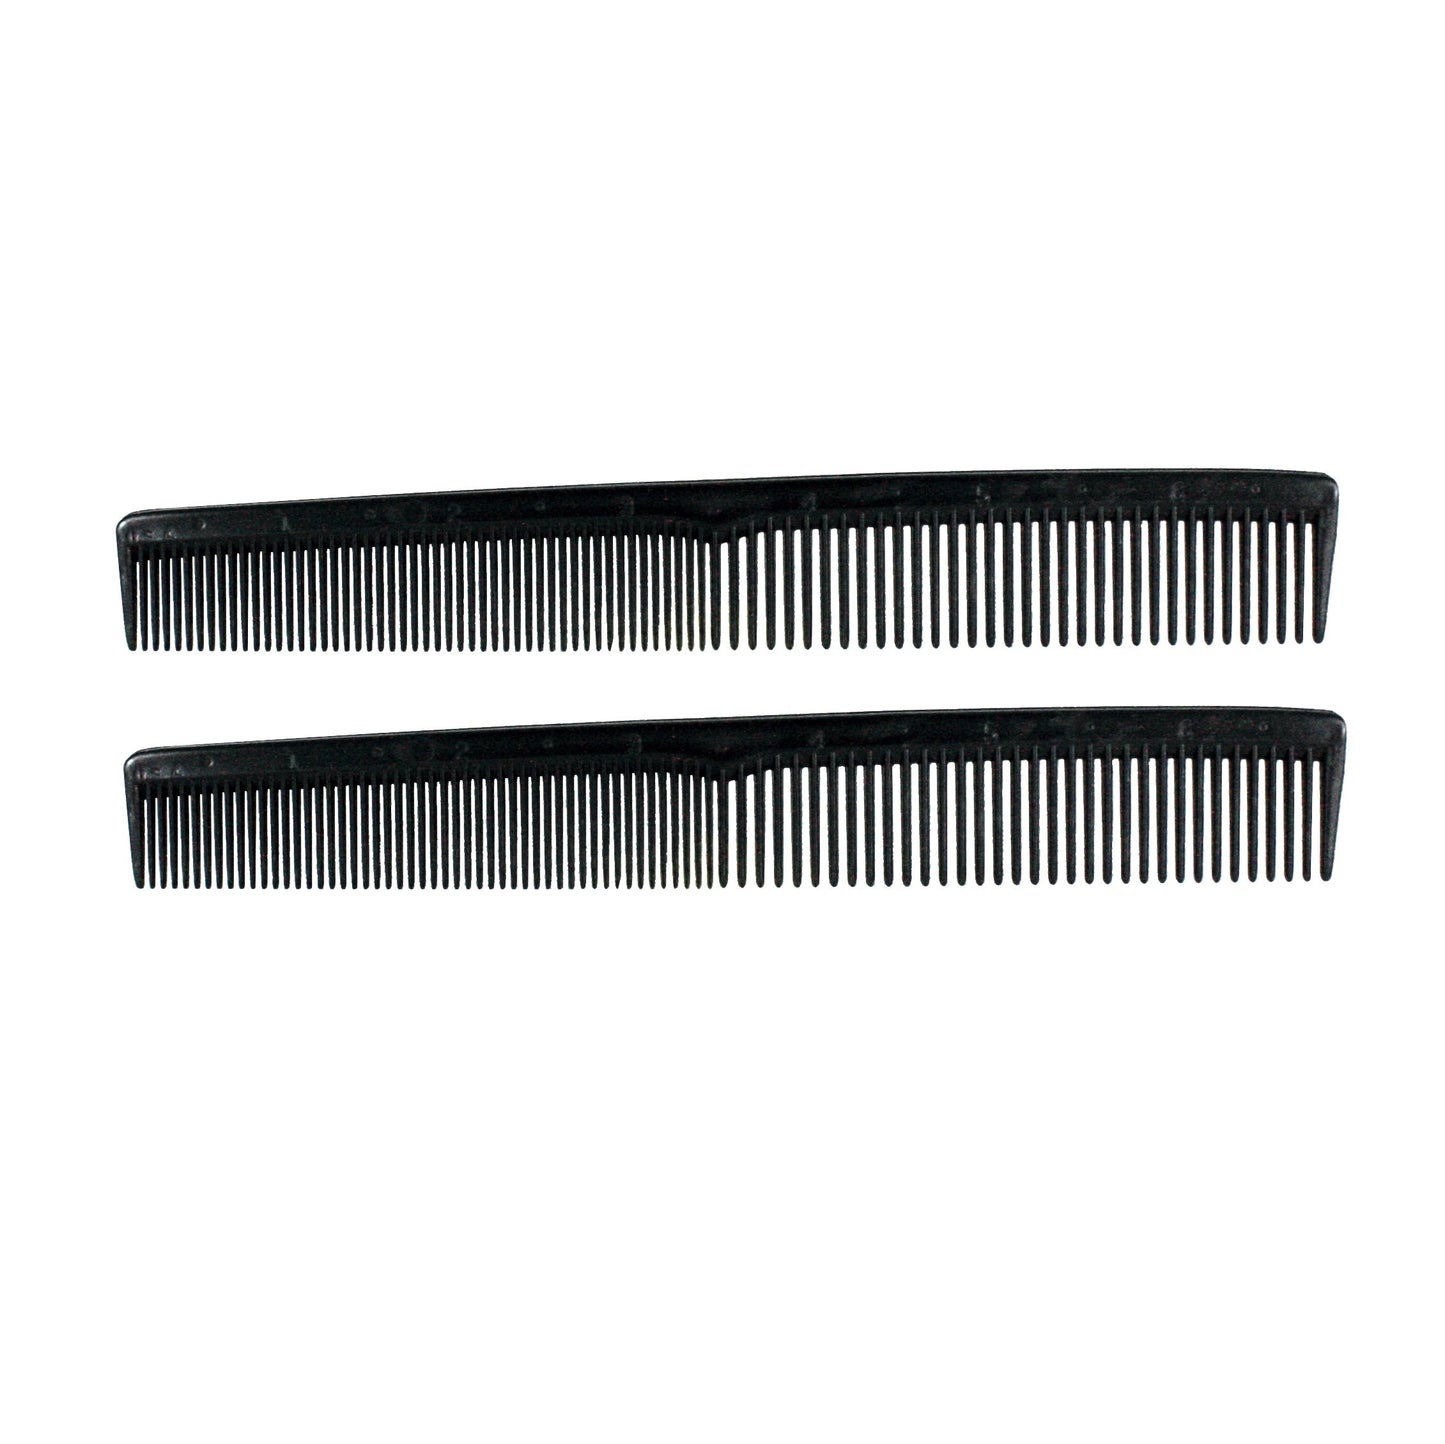 Amelia Beauty, 7in Black Plastic Styling Comb with Inch Marks, Made in USA, Professional Grade Hair Comb, Portable Salon Barber Shop Everyday Styling Cutting Hair Styling Tool, 7"x1.25", 2 Pack